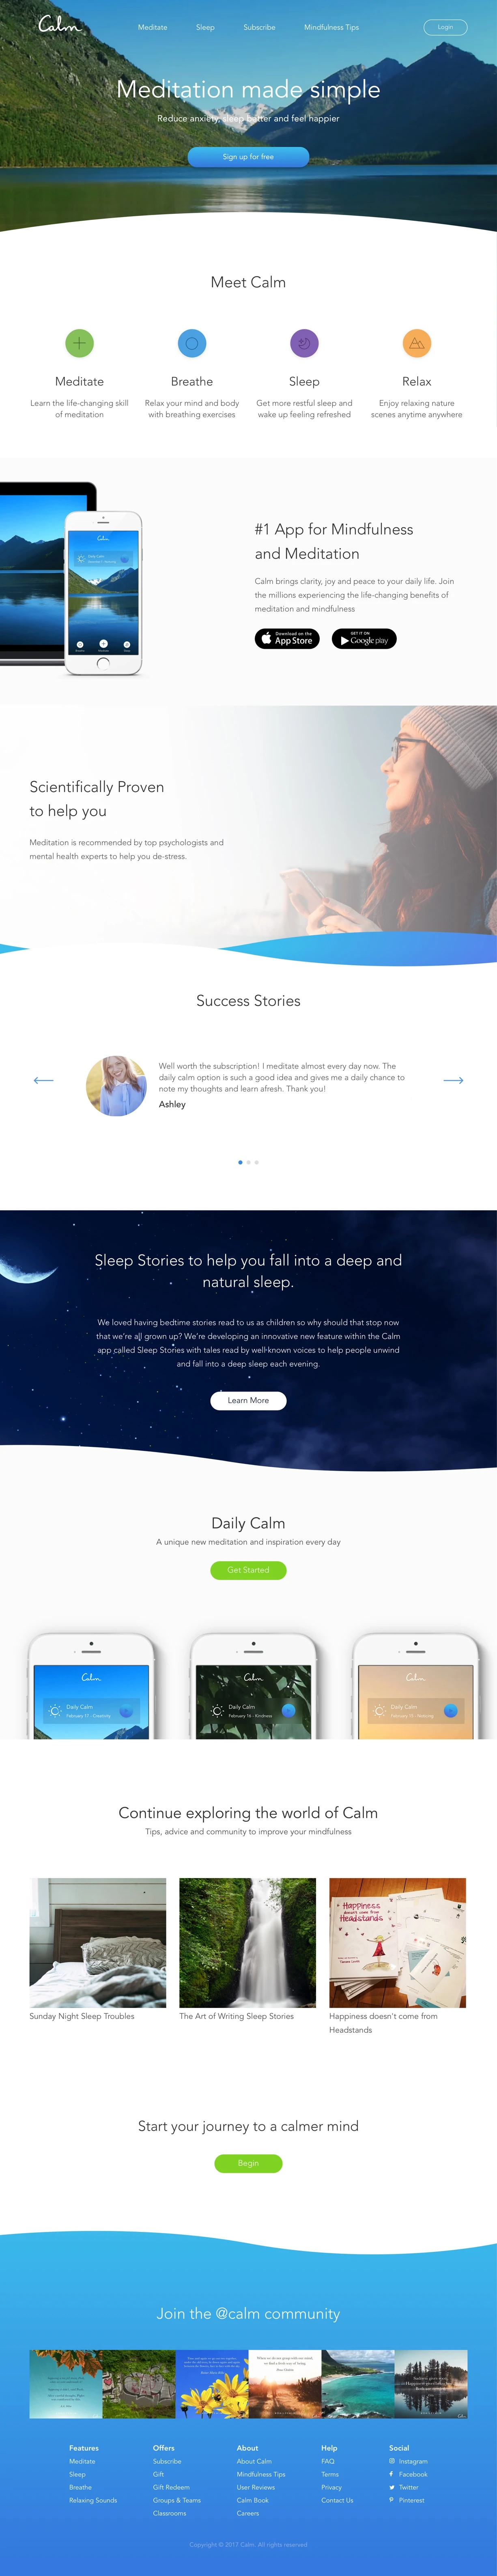 Calm Landing Page Example: Reduce anxiety, sleep better and feel happier